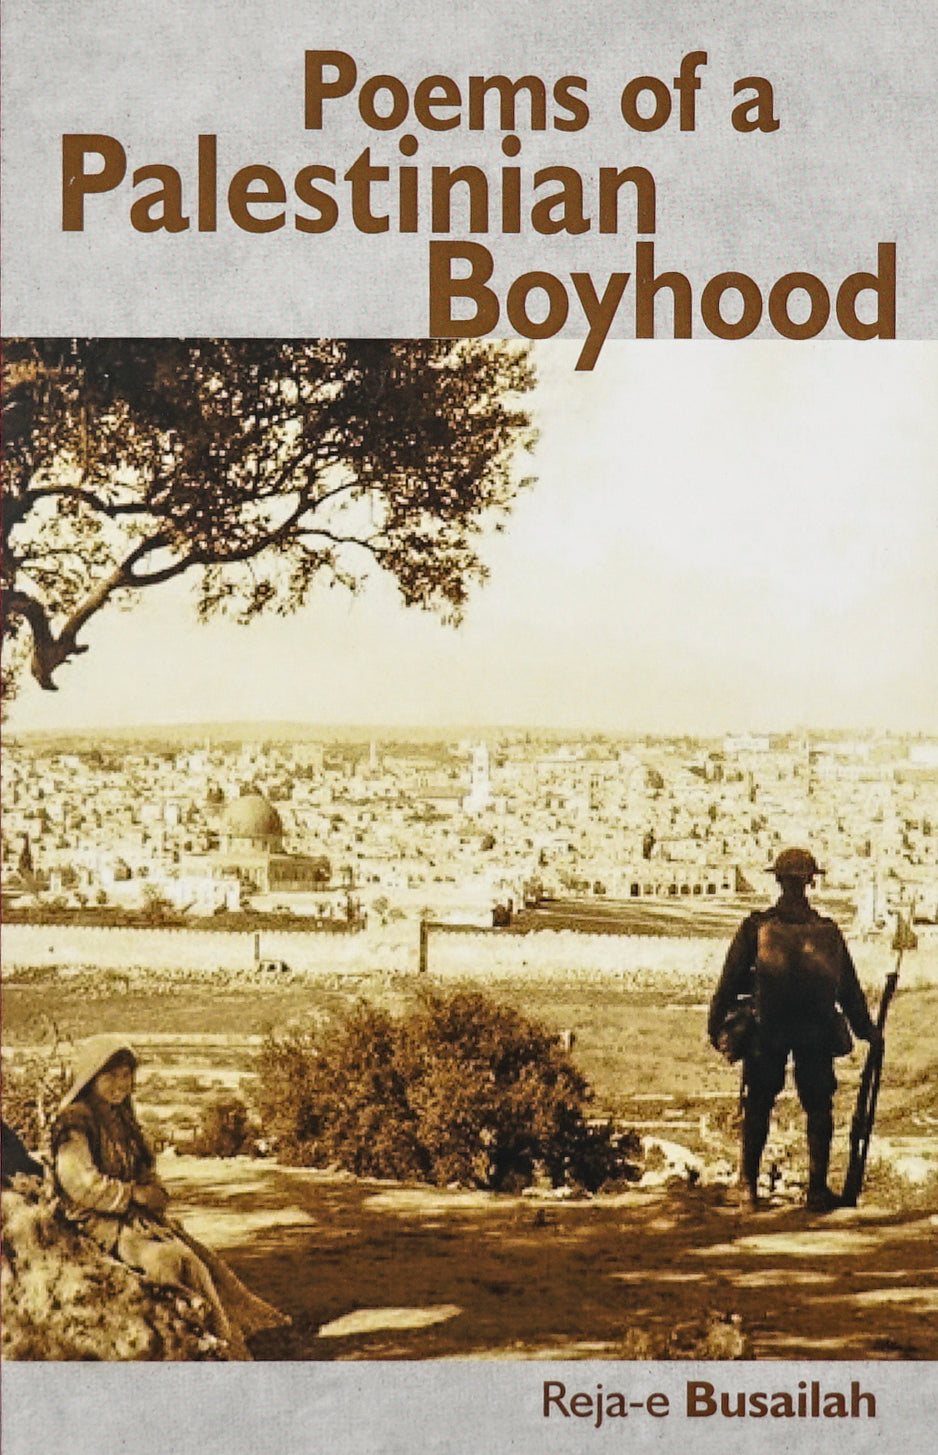 Poems of a Palestinian Boyhood in brown sans serif type over an image of two figures in a field overlooking a city from a distance. One of them faces away toward the city and leans their right hand on a rifle while the other one sits under the tree and gazes past the camera into the distance. 